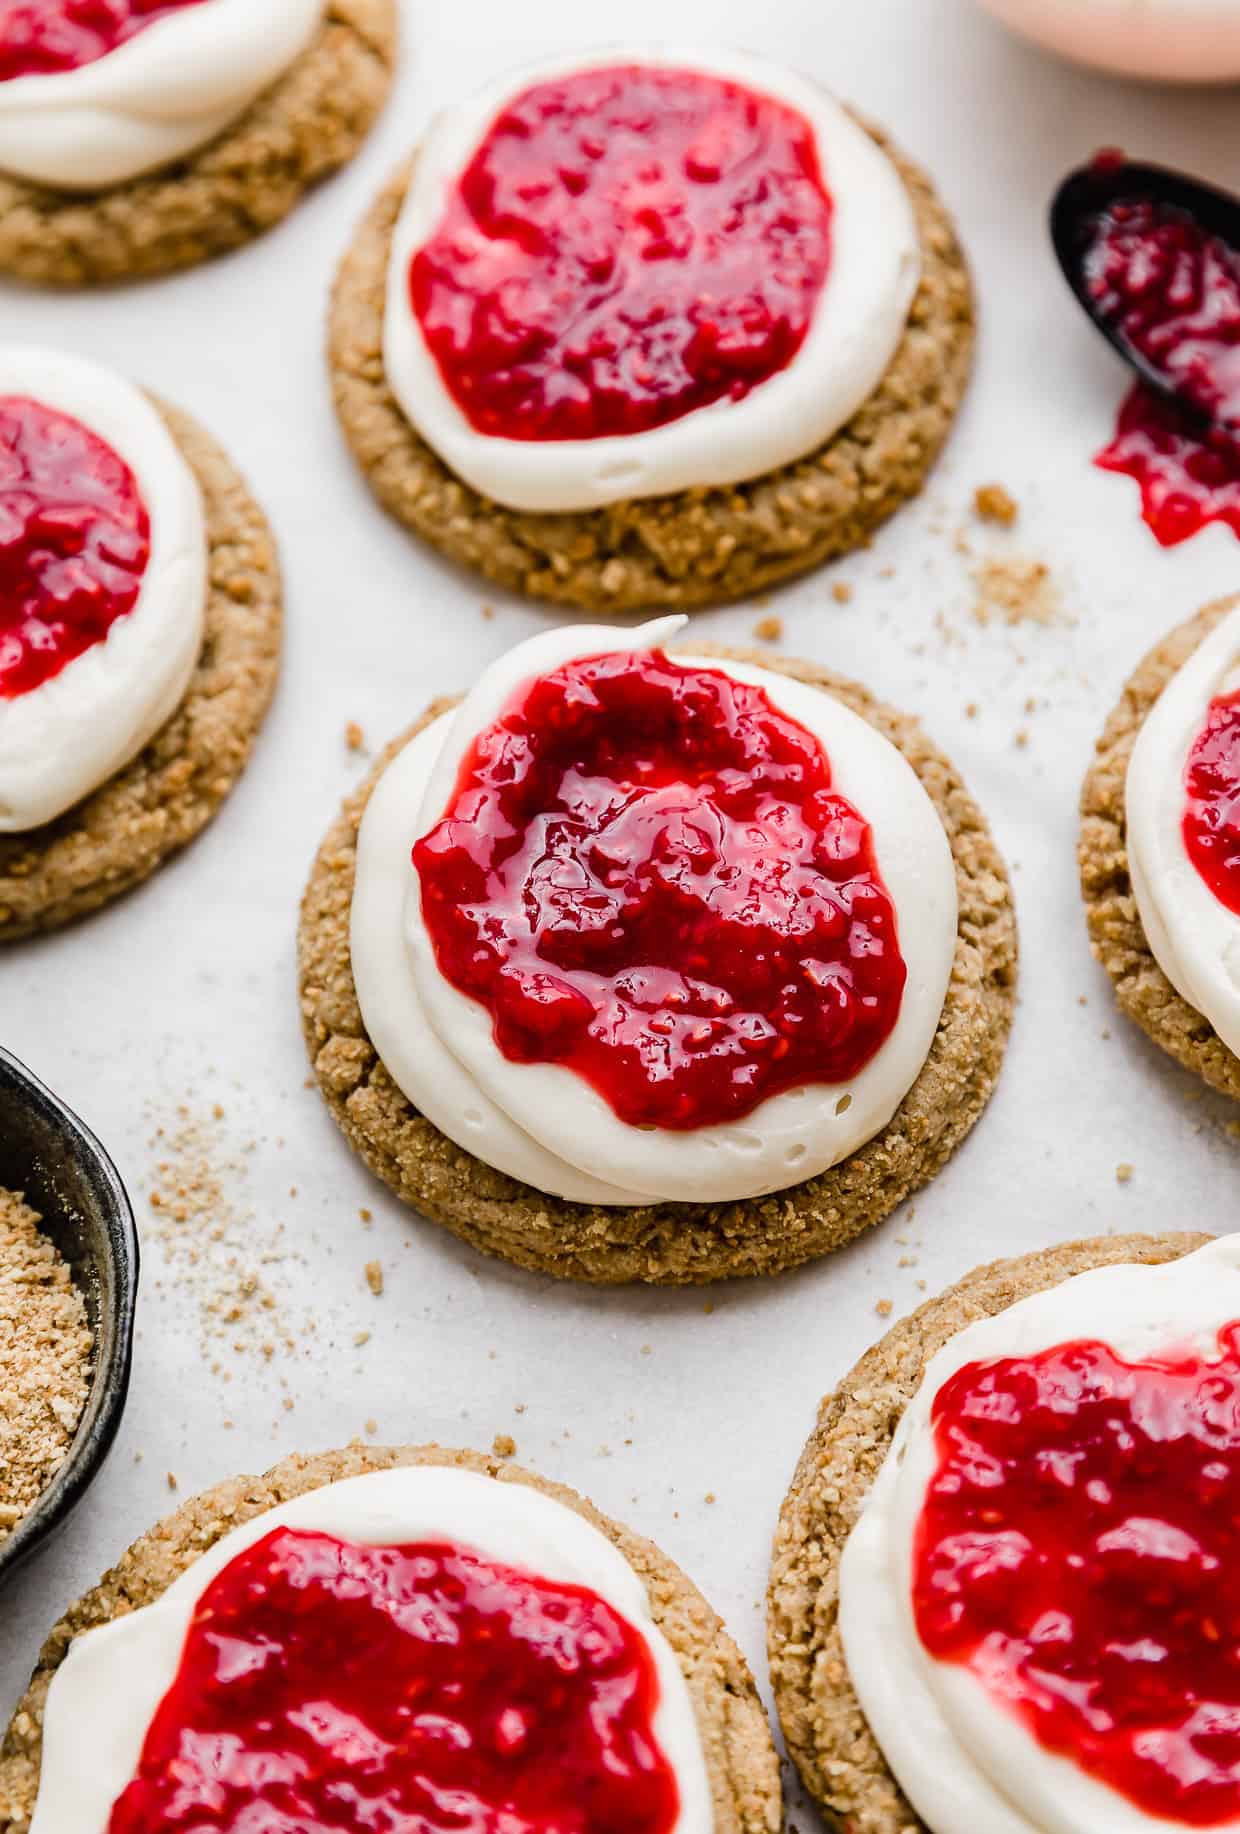 A Crumbl Raspberry Cheesecake Cookie made of a graham cracker cookie topped with a cream cheese frosting and raspberry sauce.